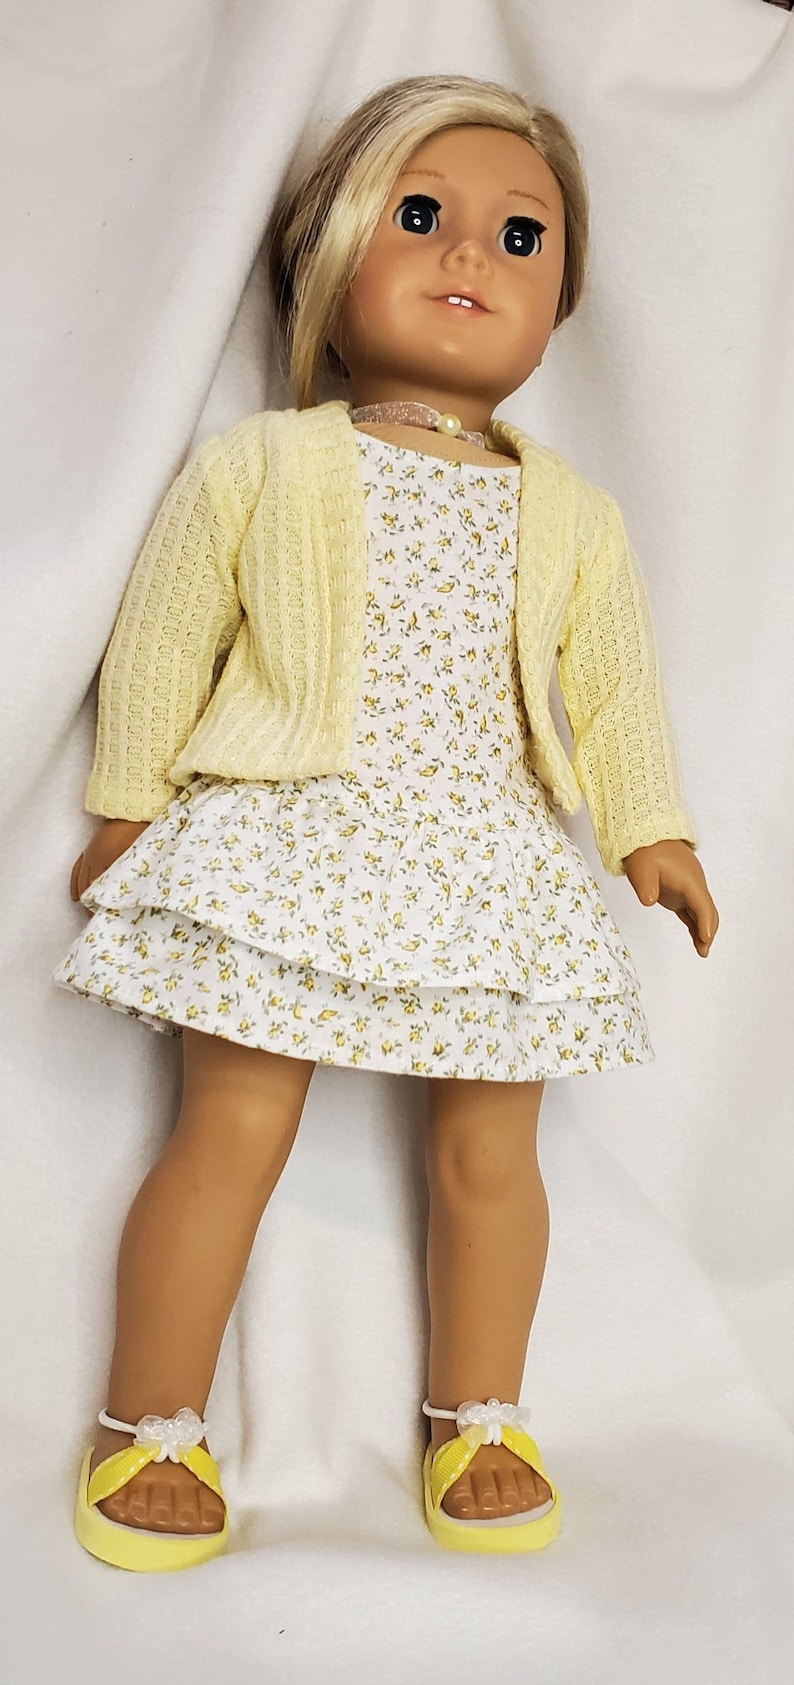 Handmade 18 Doll Clothes, Doll Clothes Fits Popular 18 inch Dolls Spring into Yellow Rosebuds outfit Dress, Cardigan, Sandals, Necklace image 5